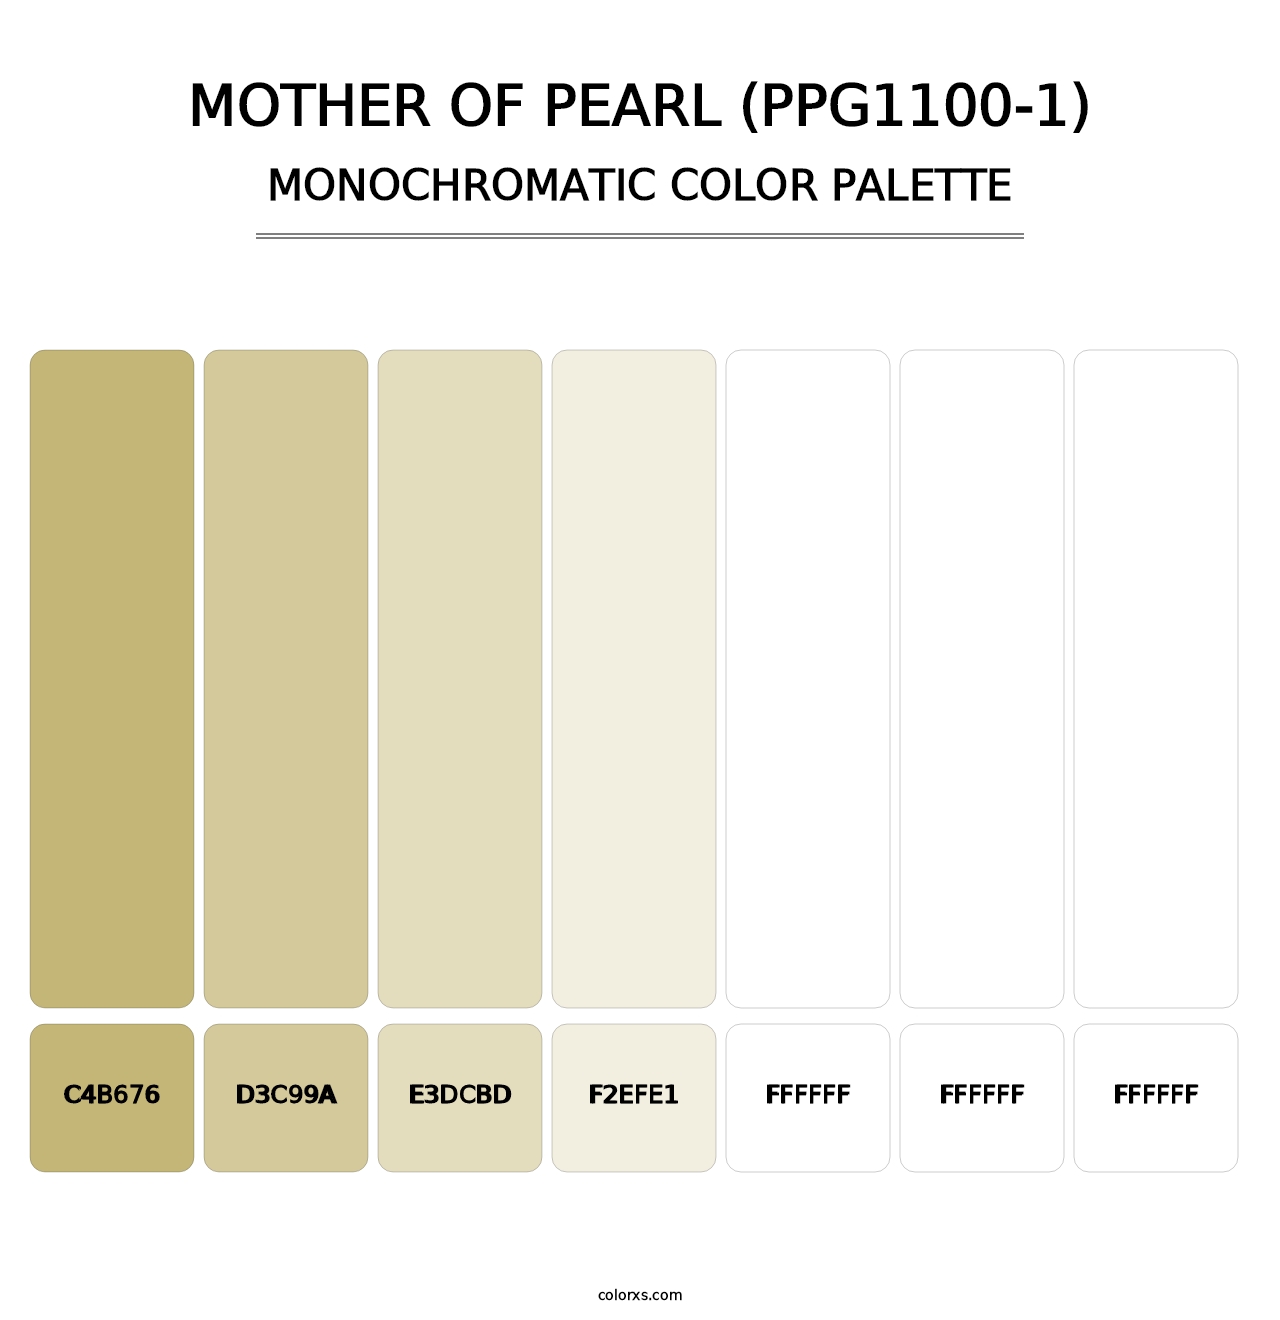 Mother Of Pearl (PPG1100-1) - Monochromatic Color Palette